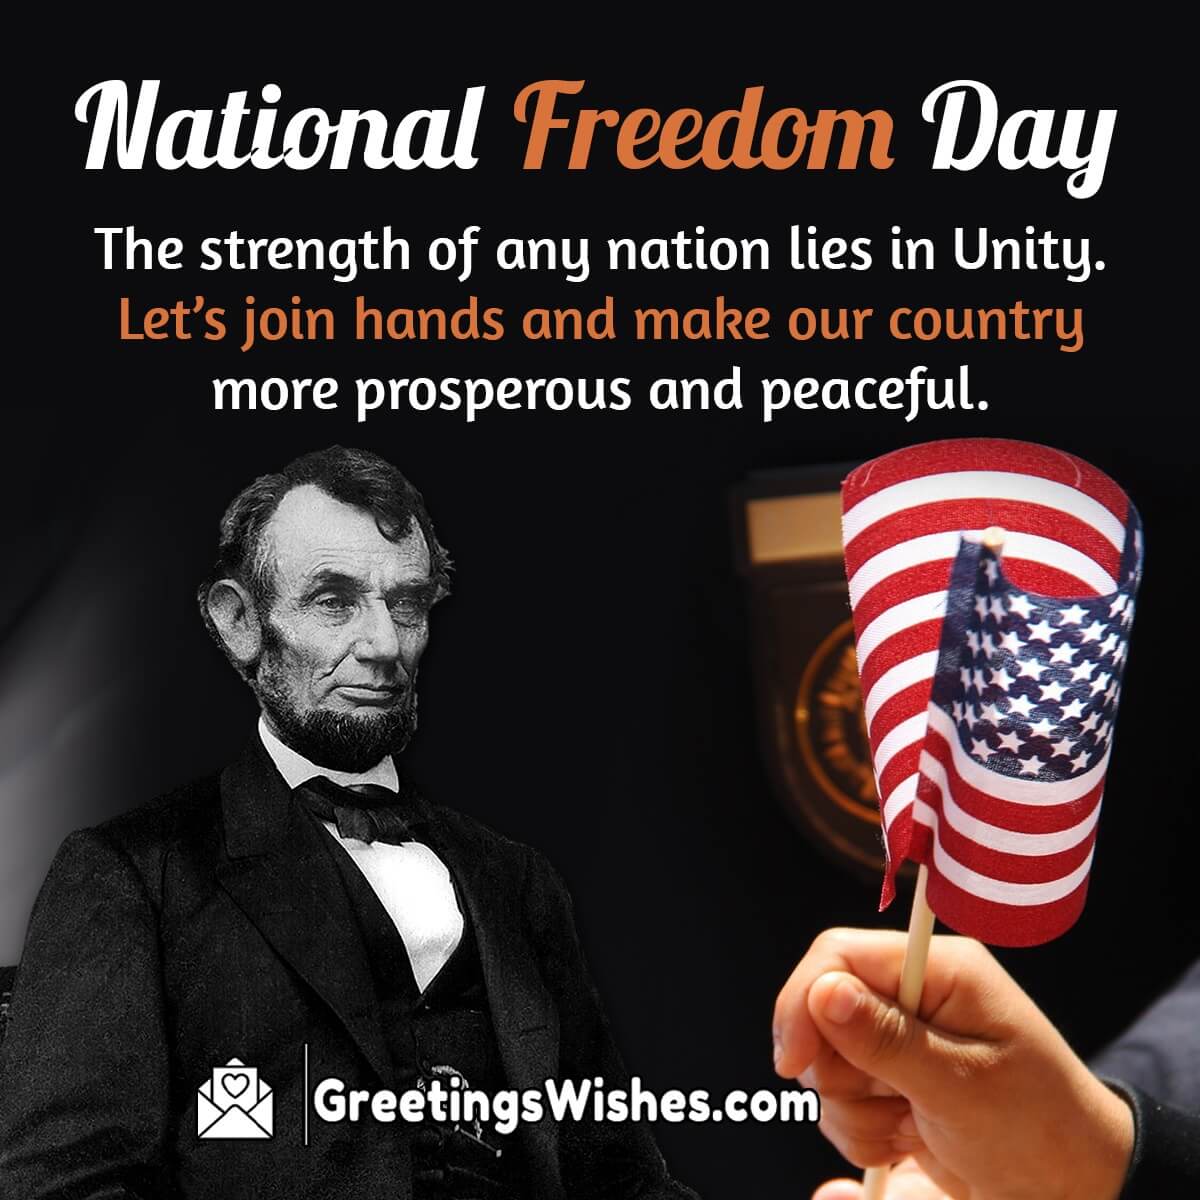 National Freedom Day Wishes